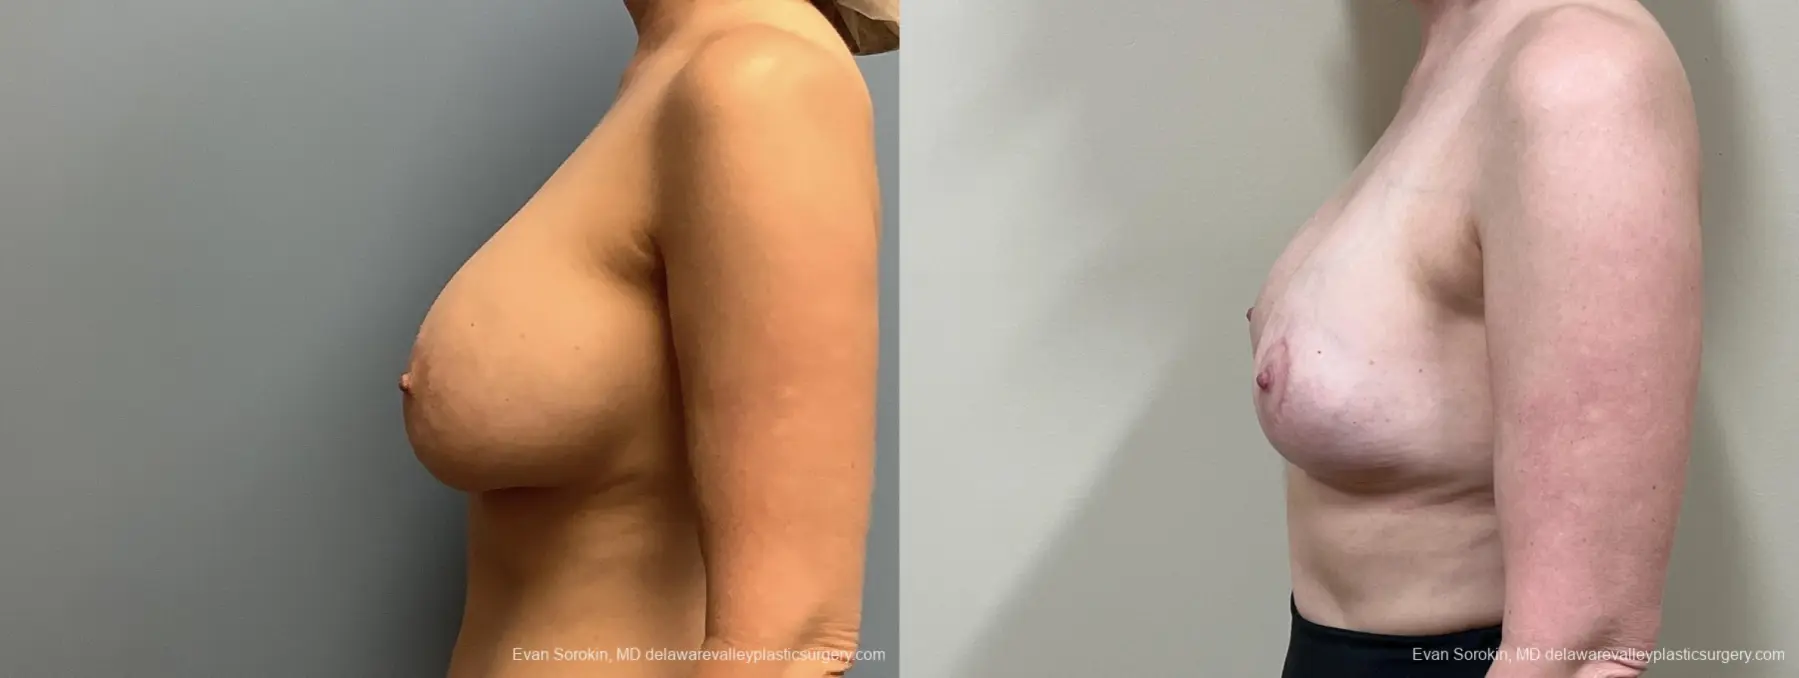 Breast Reduction: Patient 9 - Before and After 5